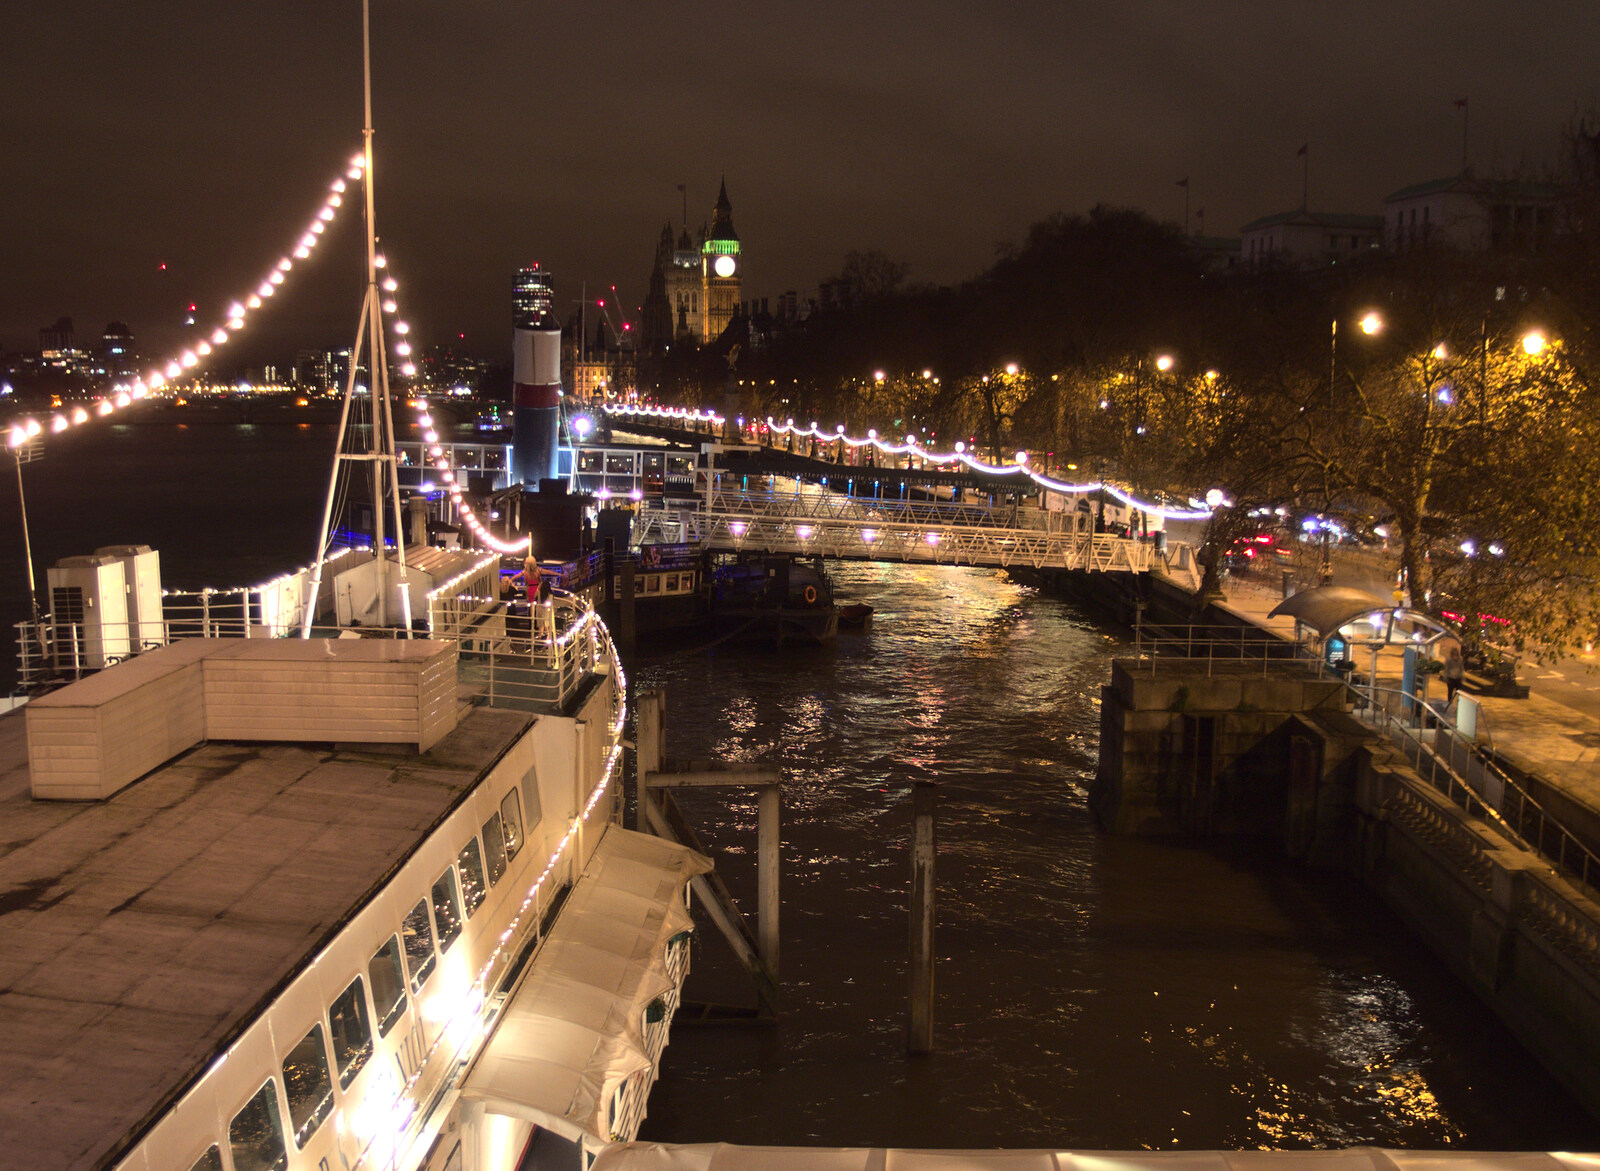 Victoria Embankment from SwiftKey Innovation Nights, Westminster, London - 19th December 2014